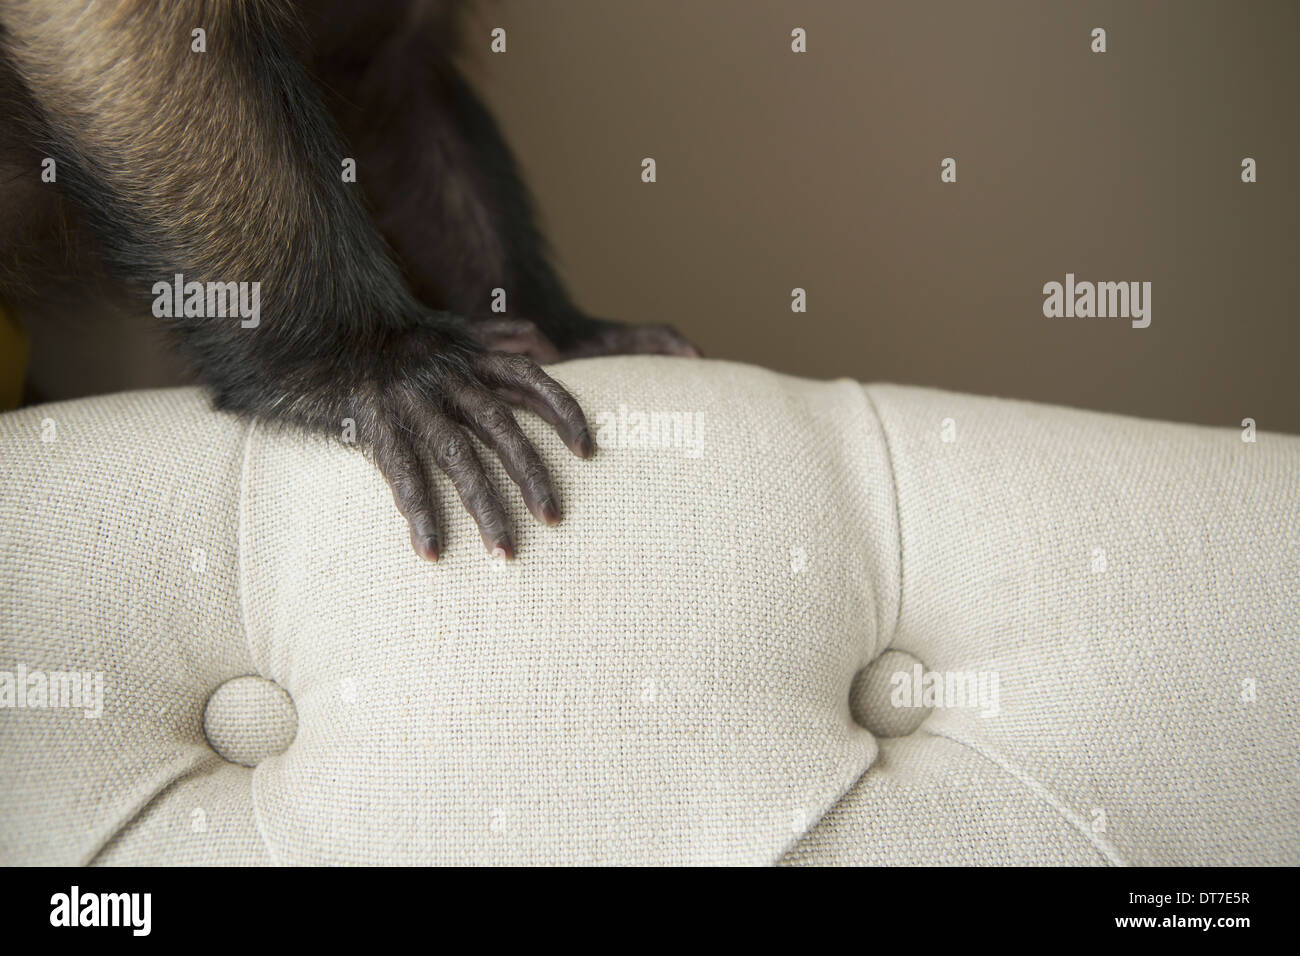 A capuchin monkey seated on a chair with a hand spread on the covers Austin Texas USA Stock Photo